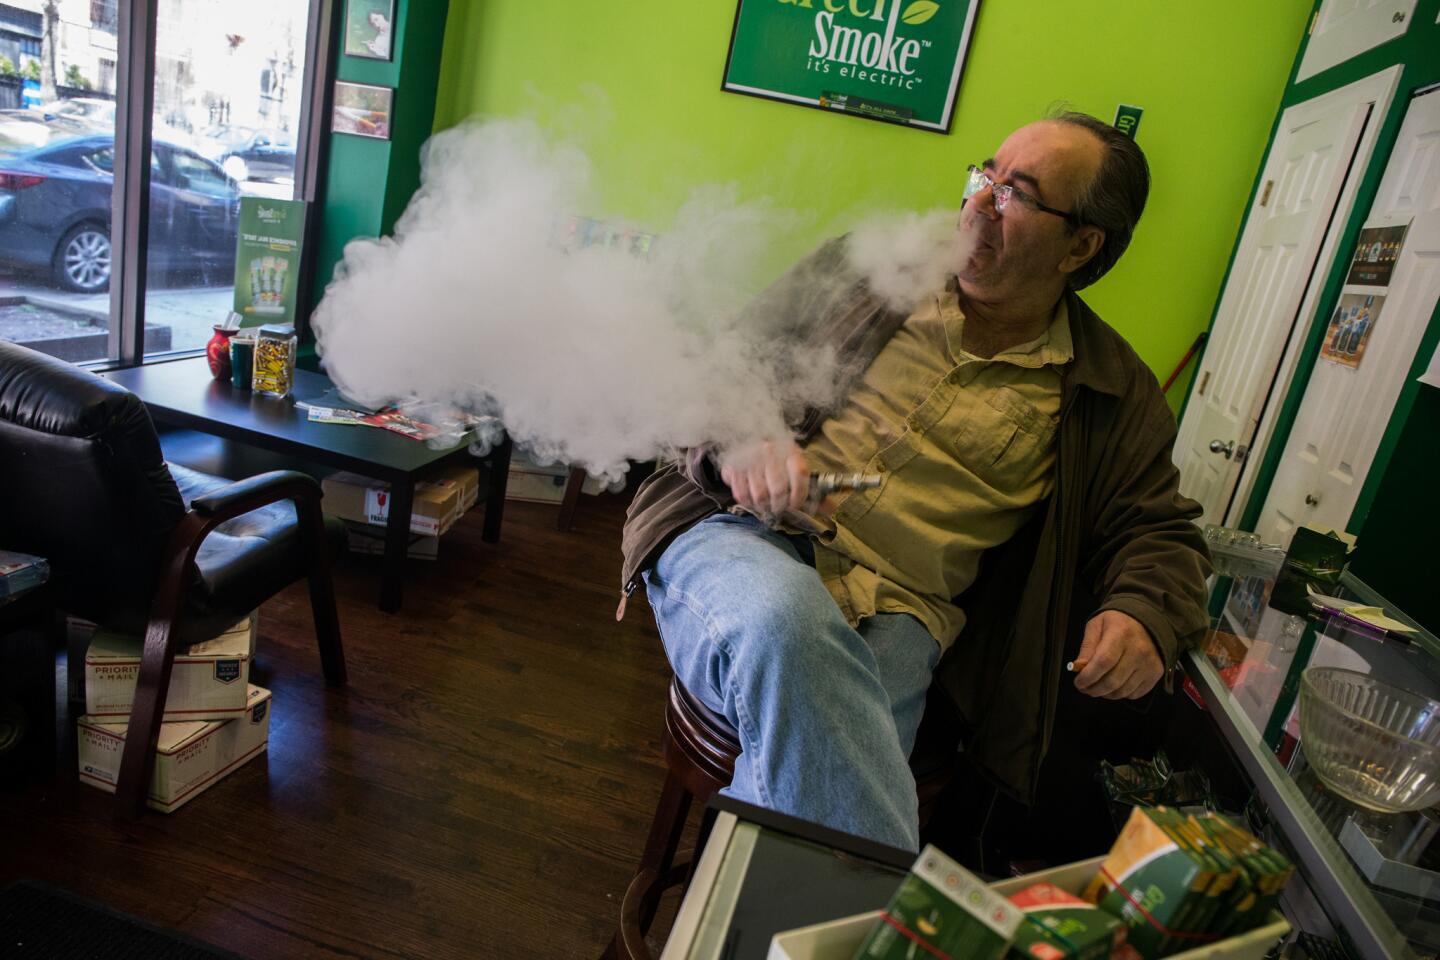 Frank Rex, owner of Let's All Vape, e-cigarette store in Chicago, talks May 5, 2016, about the new regulations. Industry groups say the FDA's new regulations that require all vaping products to be subjected to tests costing $1 million or more will force thousands of small businesses to close.